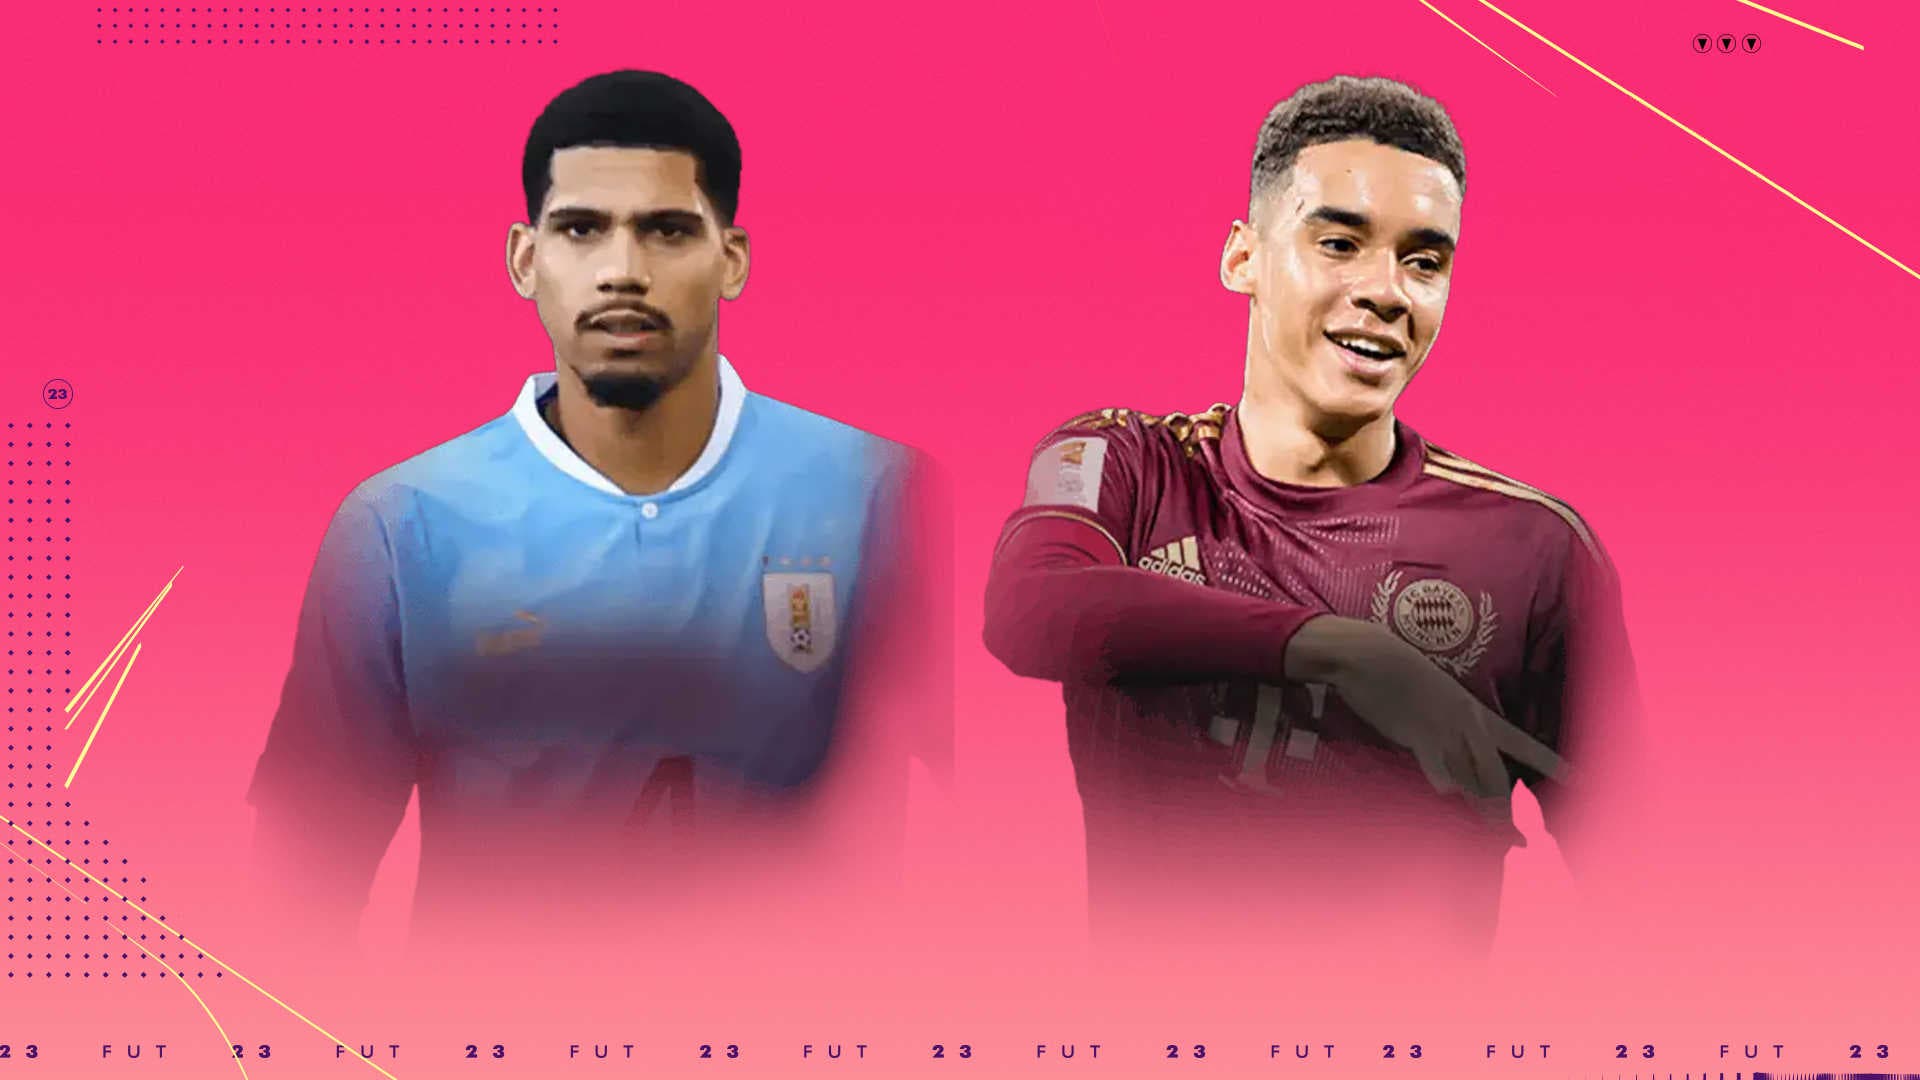 FIFA 23: These are the cards of the second team of the Future Stars (with many star upgrades)